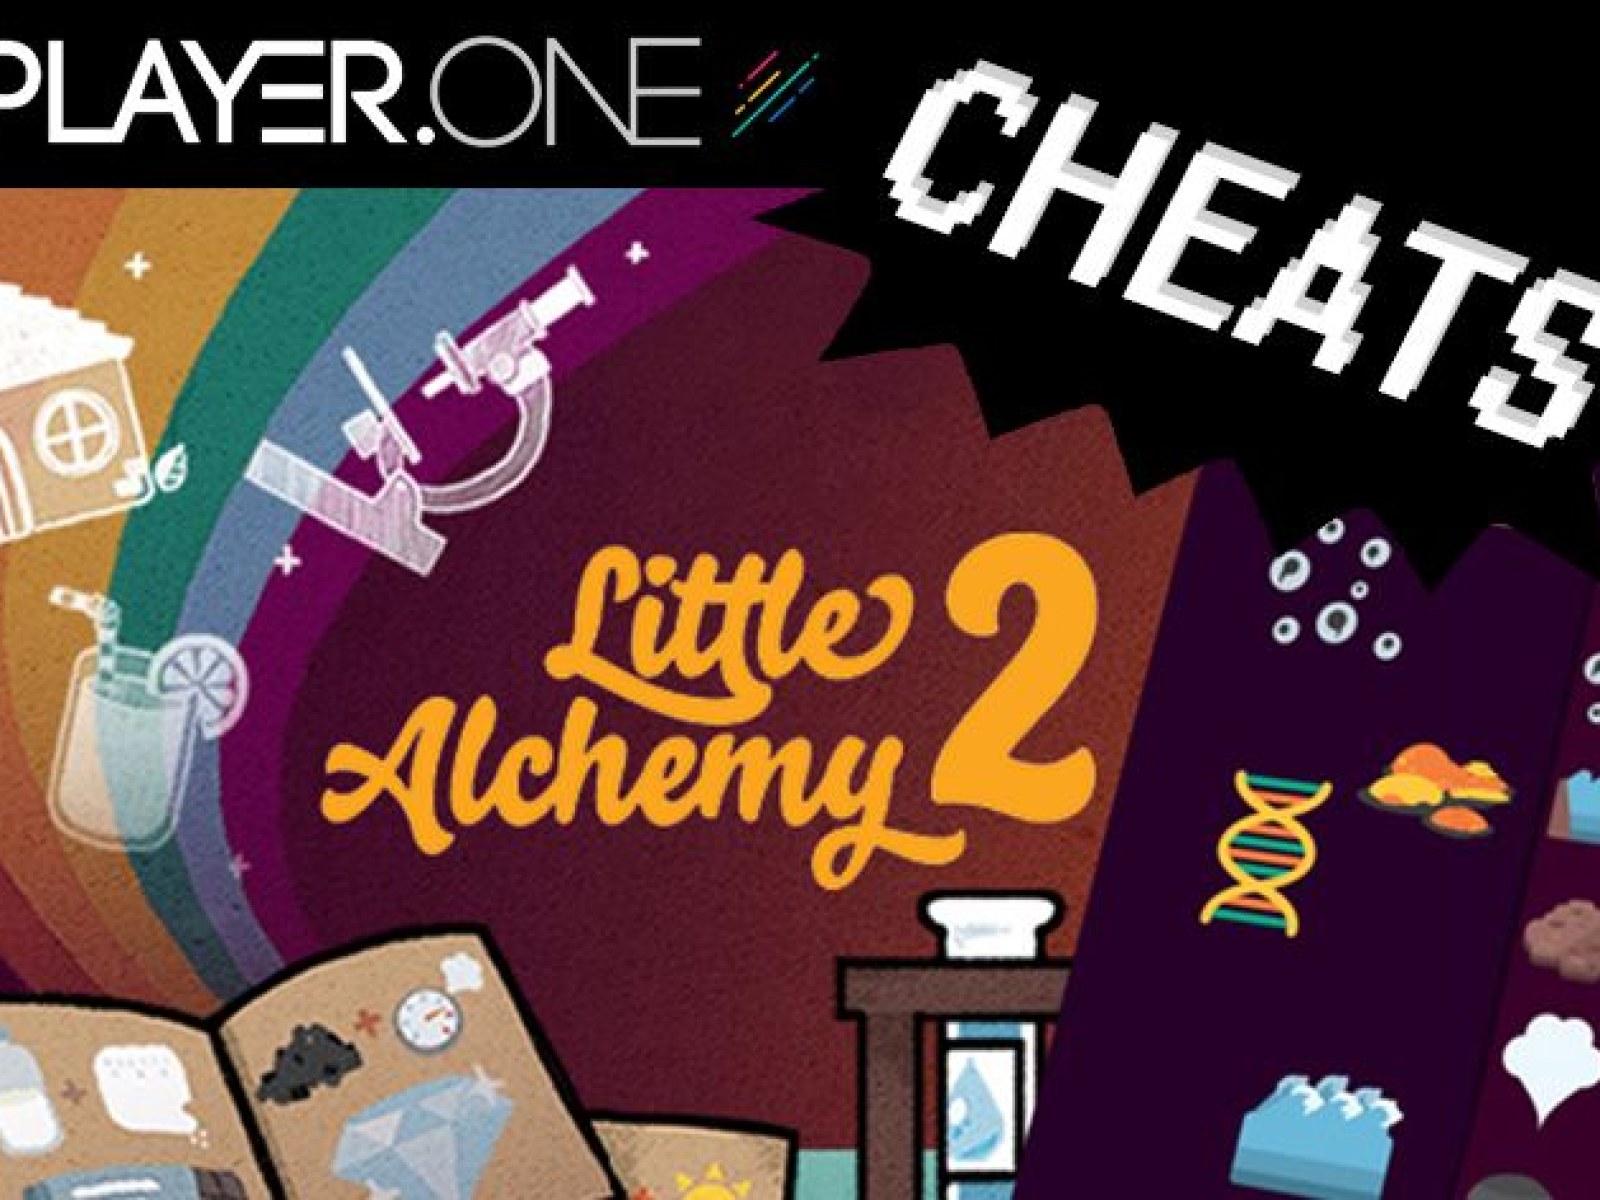 Complete List Of Little Alchemy 2 Cheats & Hints Part 2 ( I - Z  Combinations)